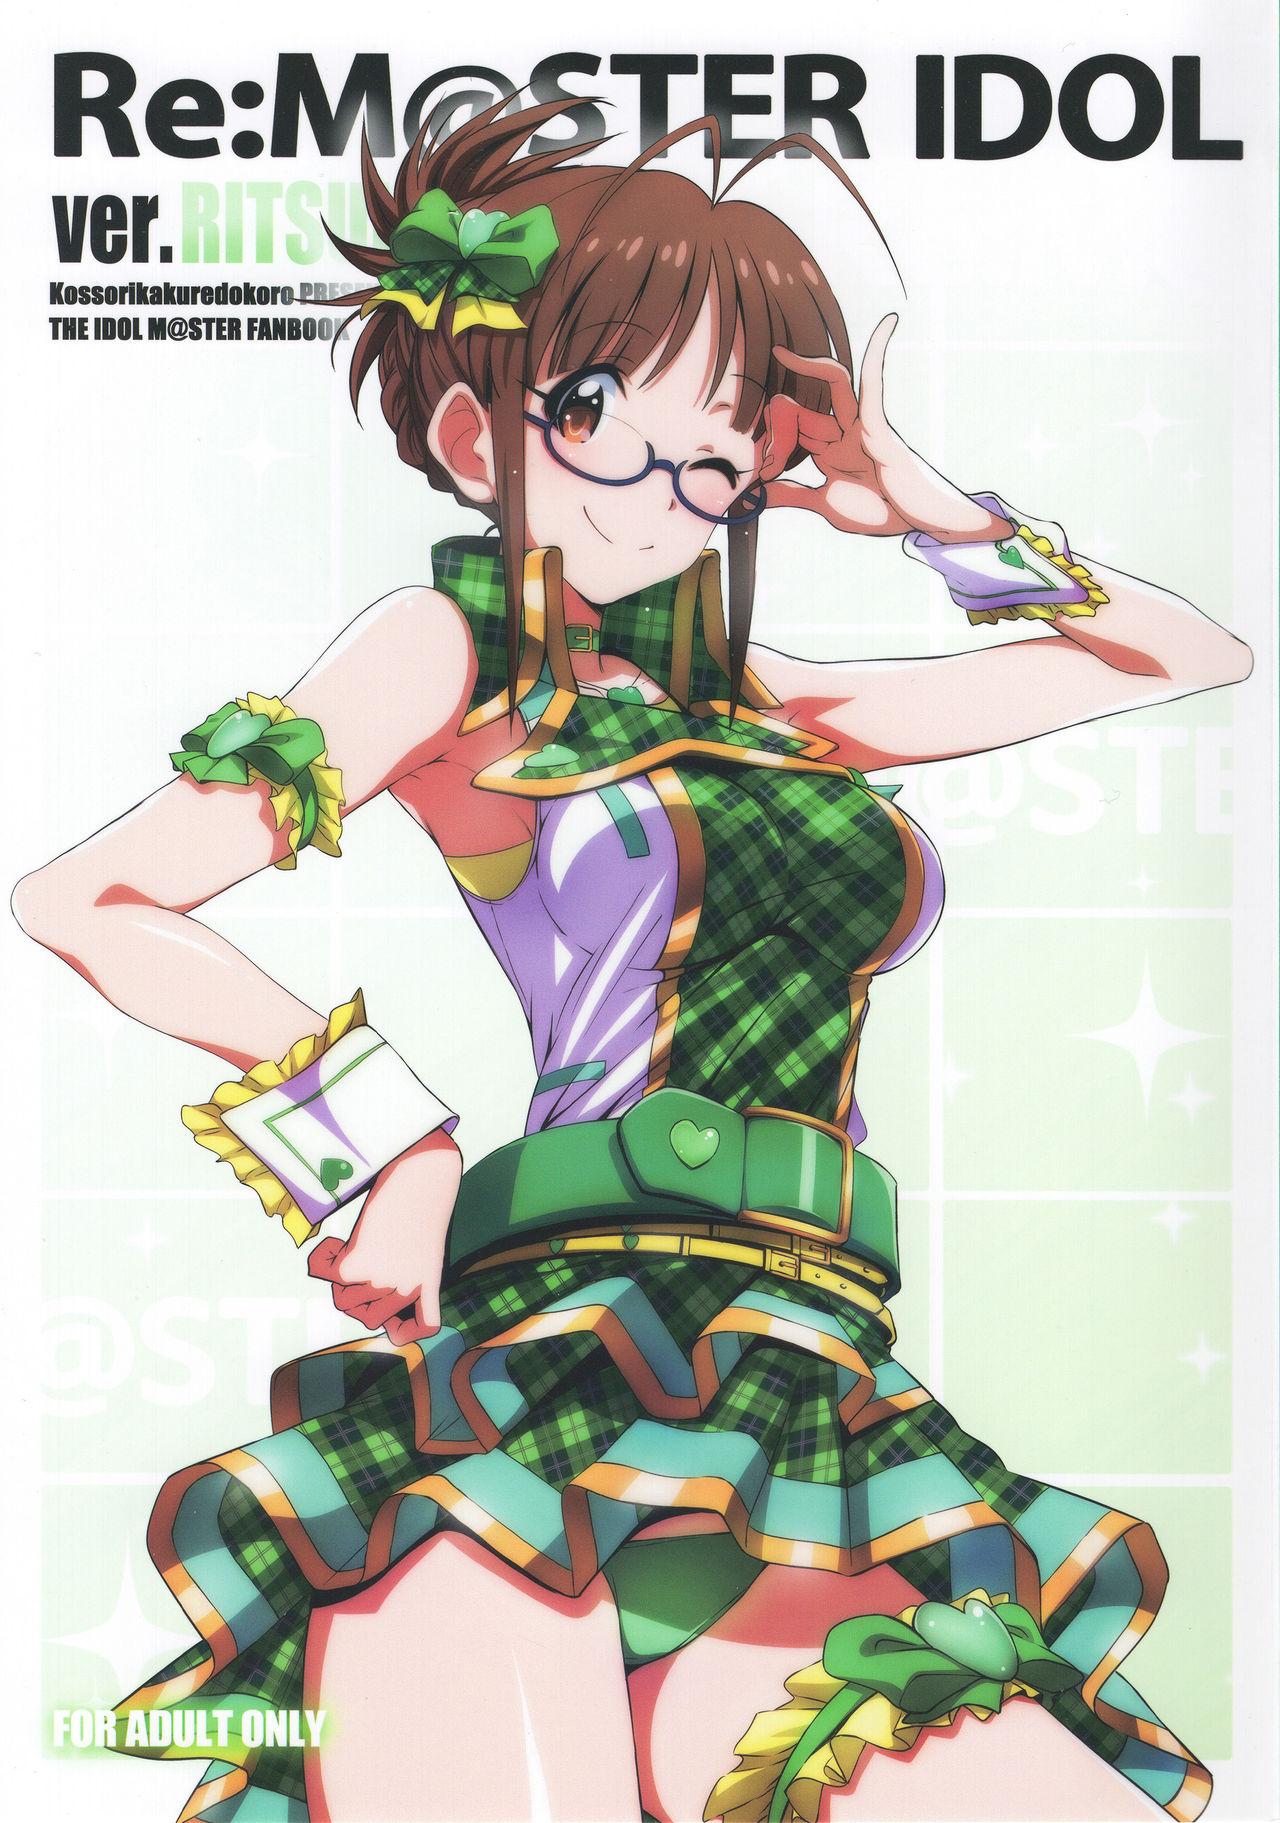 Tributo Re:M@STER IDOL ver.RITSUKO - The idolmaster Amante - Picture 1